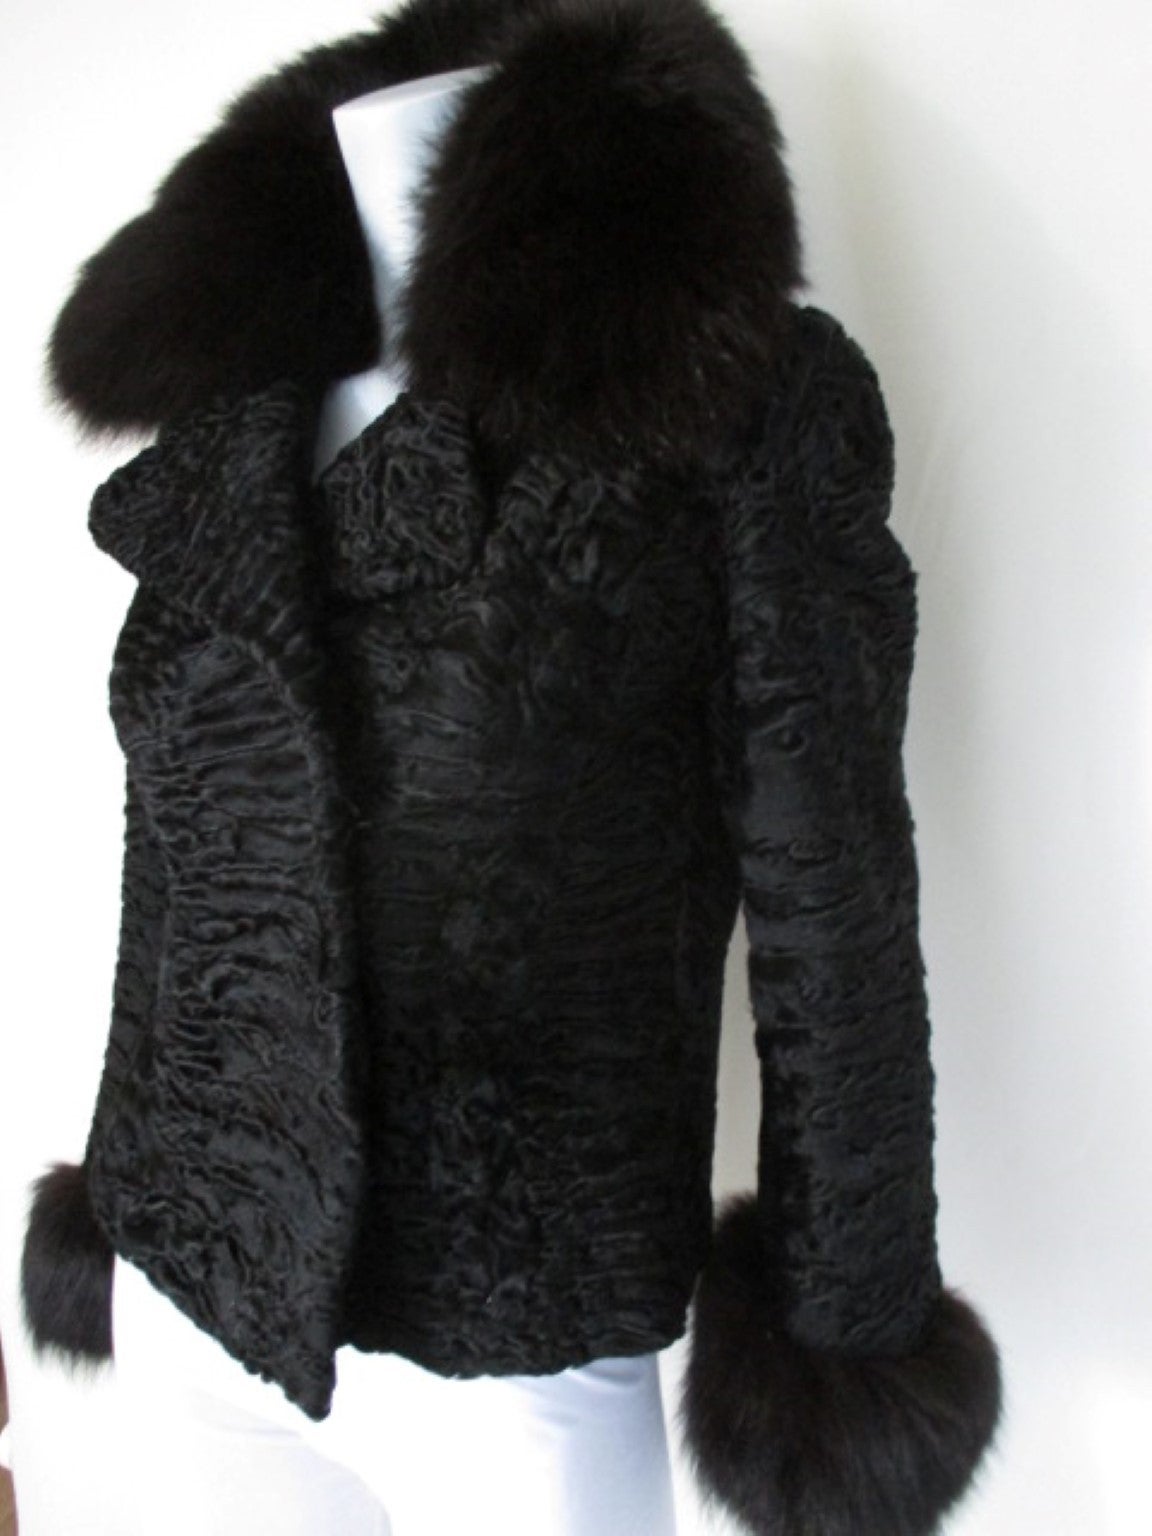 This jacket has flaired sleeves with black fox cuffs.
It has a fox collar, 2 hooks and an inside pocket.
It is from the atelier Gerson in Germany.

Size is about EU 36-38